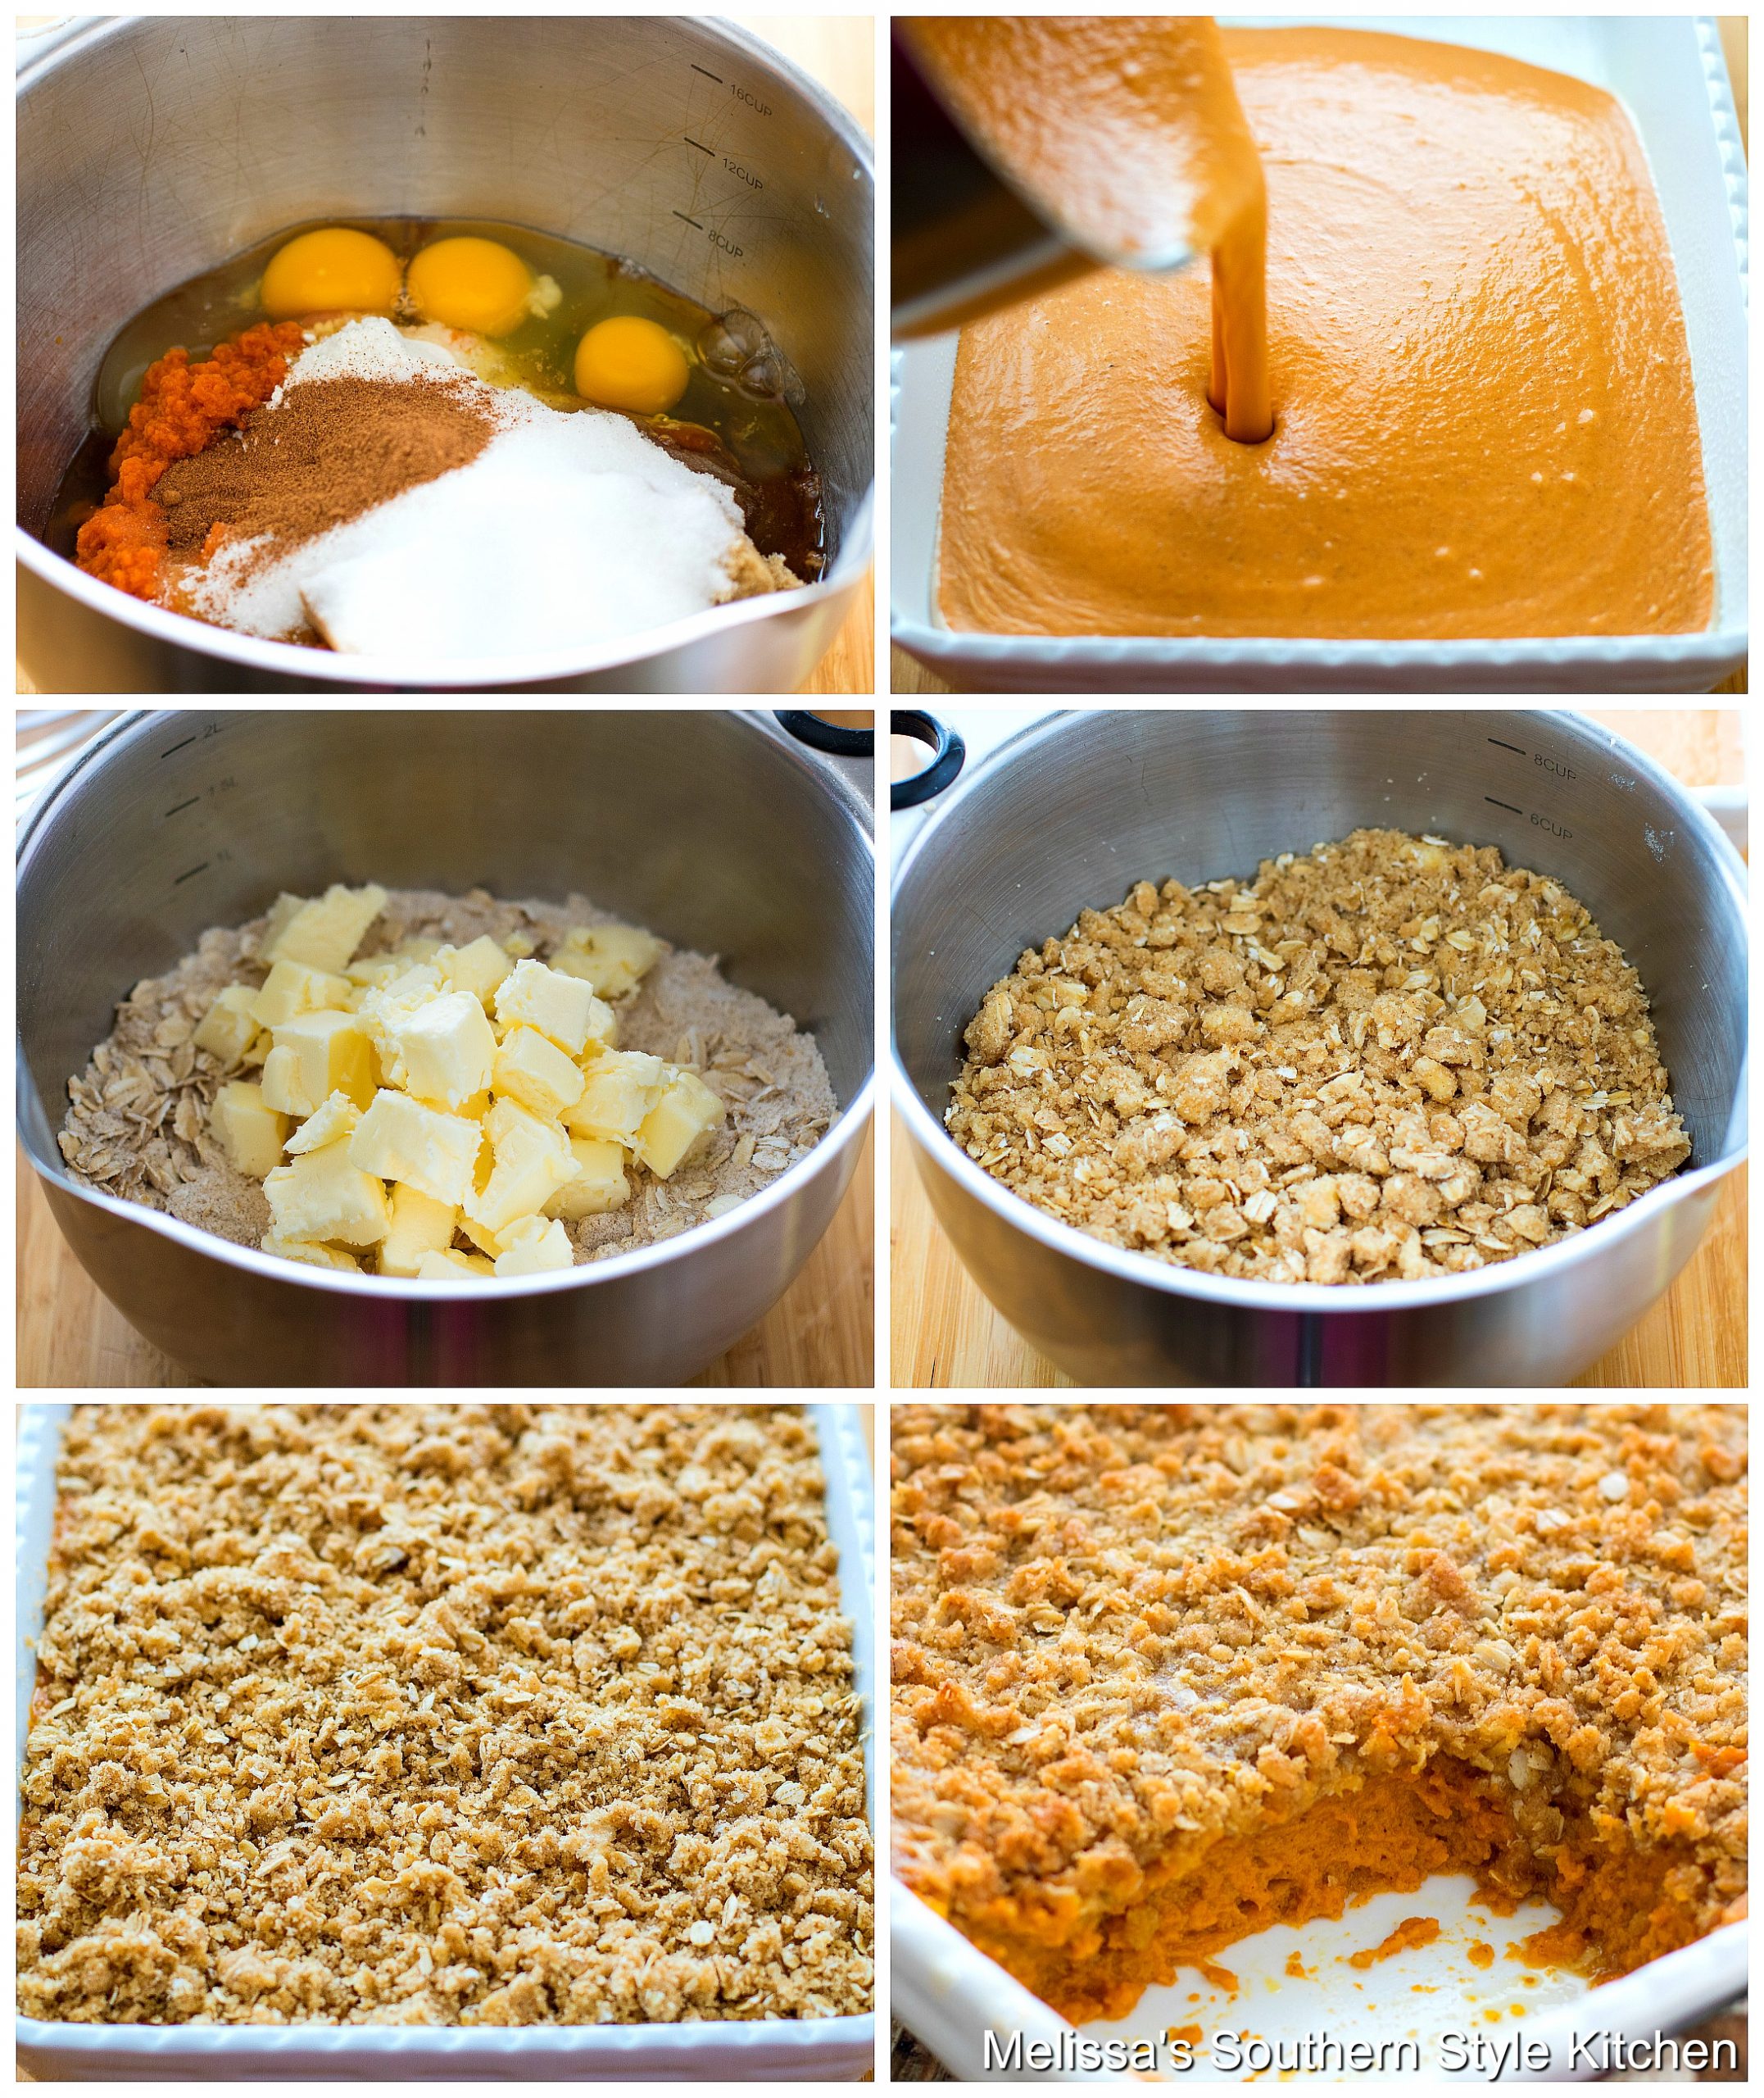 Step-by-step preparation images and ingredients for Pumpkin Pie Crumble